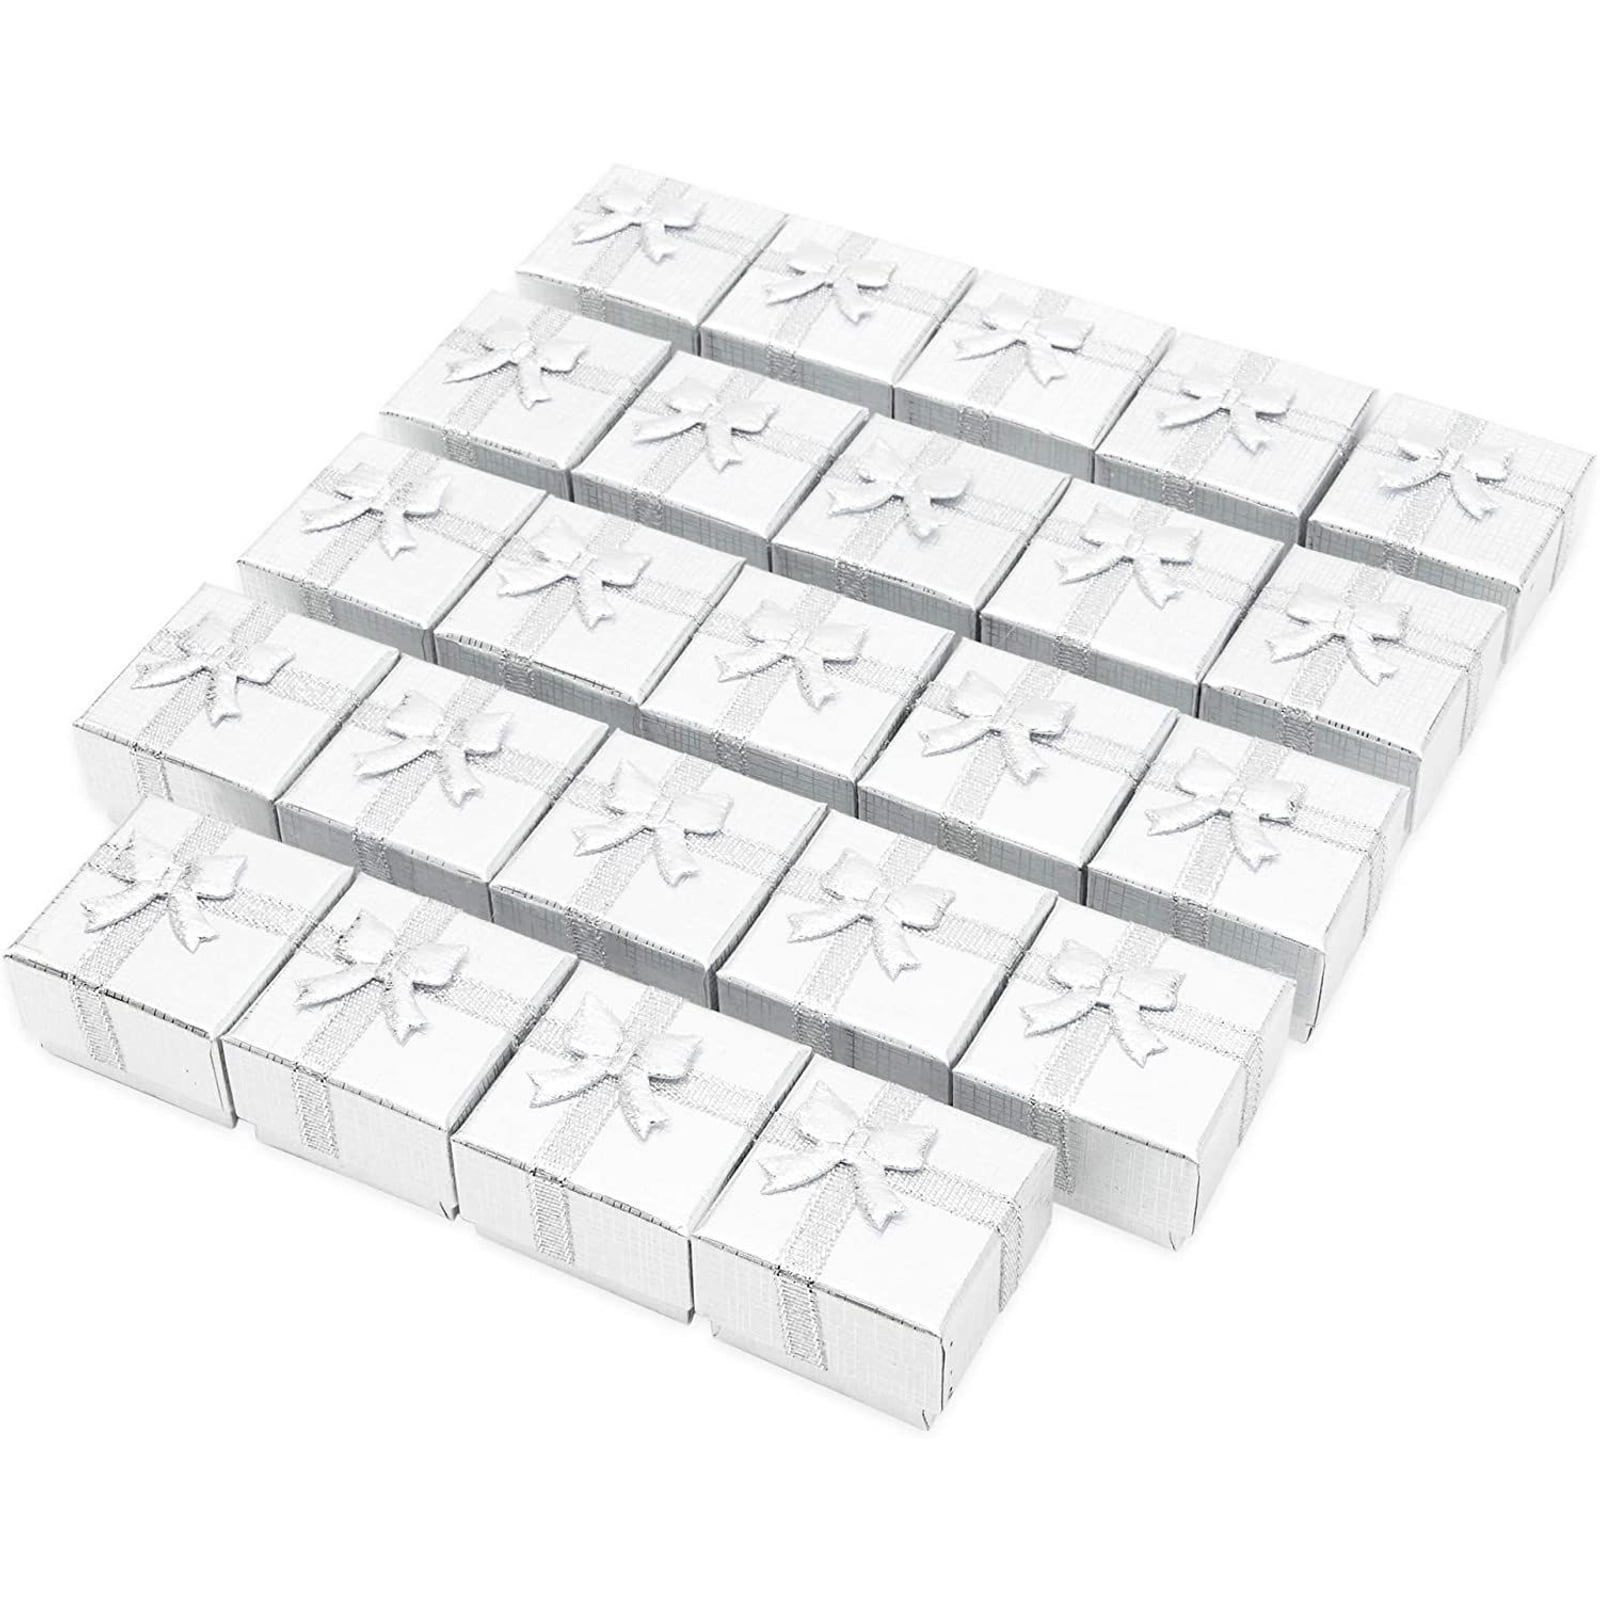 Pendants Earrings 24-Pack Silver Jewelry Gift Boxes with White Velvet Foam Insert for Rings Metallic Foil by TheDisplayGuys 